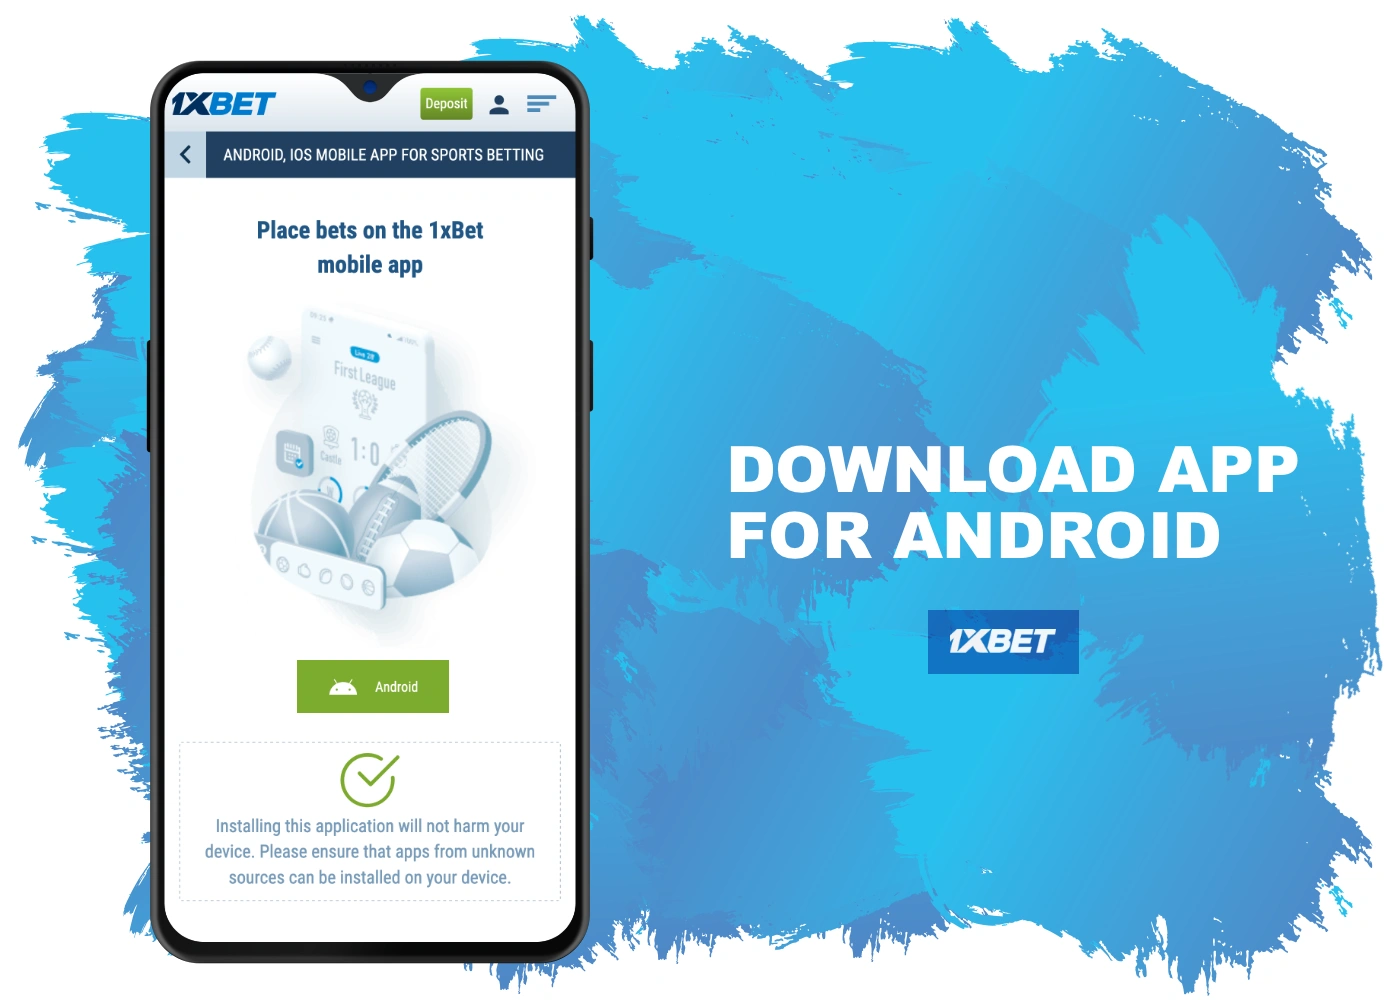 A step-by-step guide on how to download the 1xbet app on Android